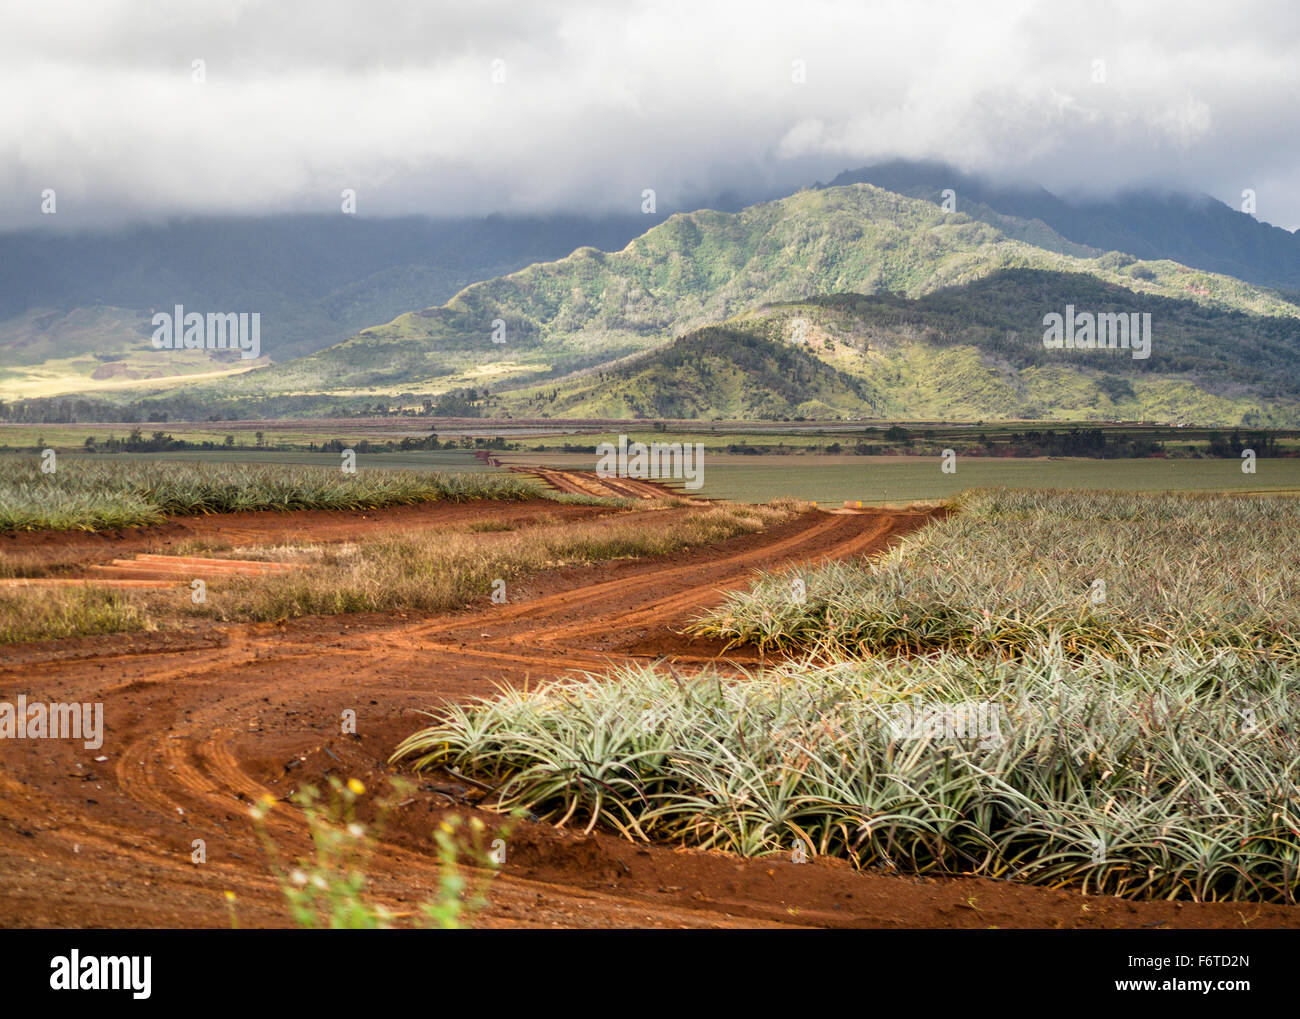 Pineapple Field and red dirt road on Oahu. A rough red dirt road cuts through young pineapple plants in a field Stock Photo